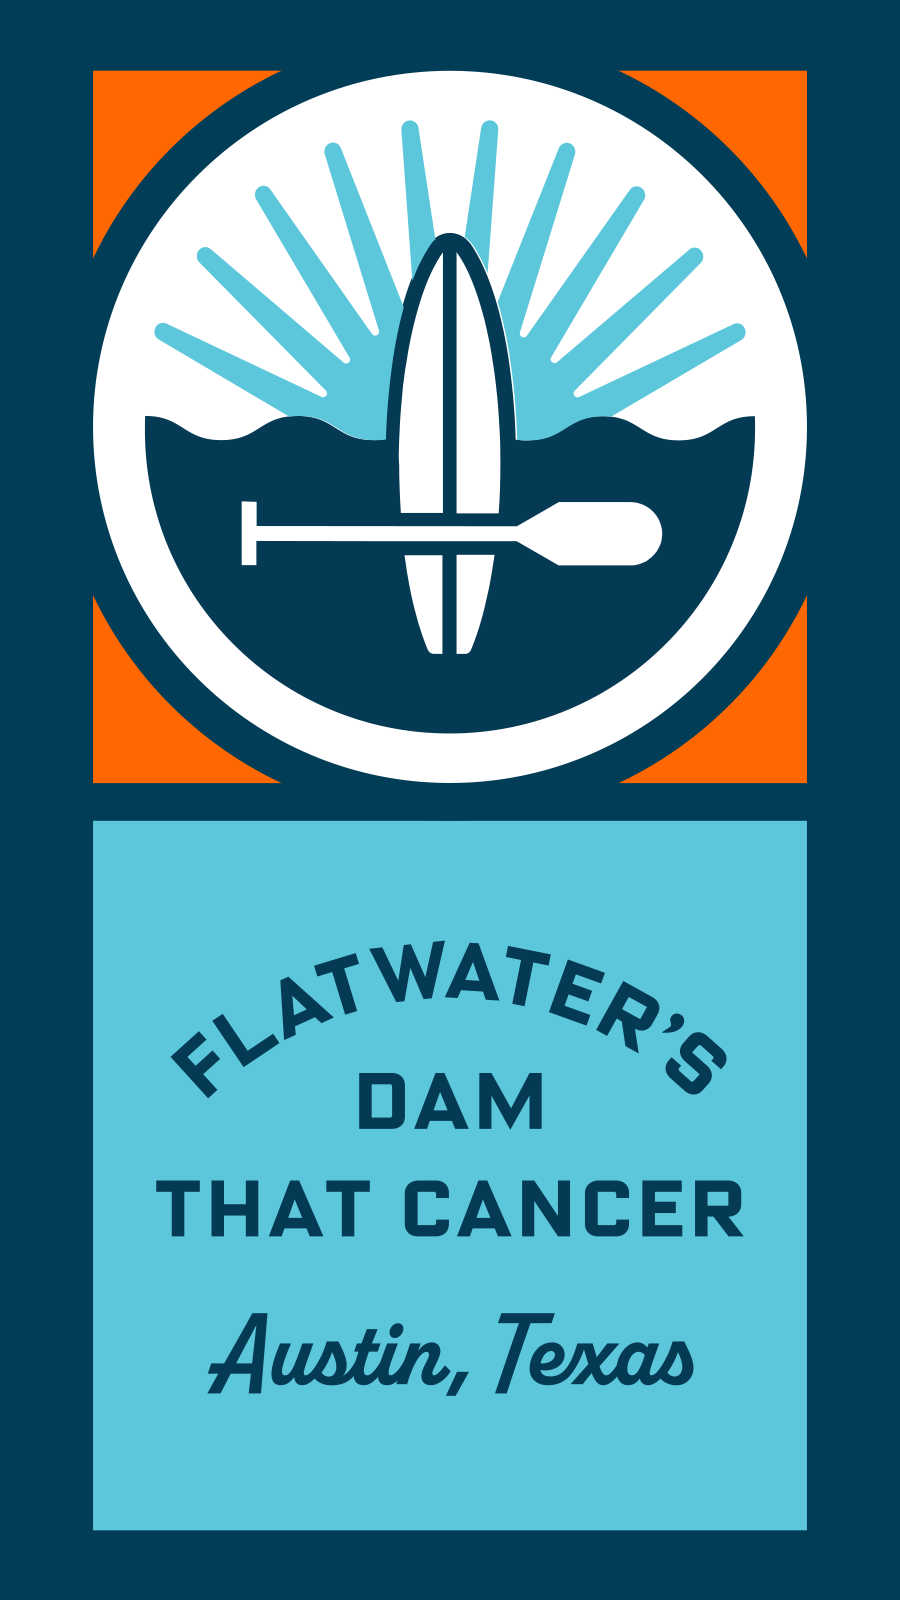 Flatwater's Dam That Cancer Event sign